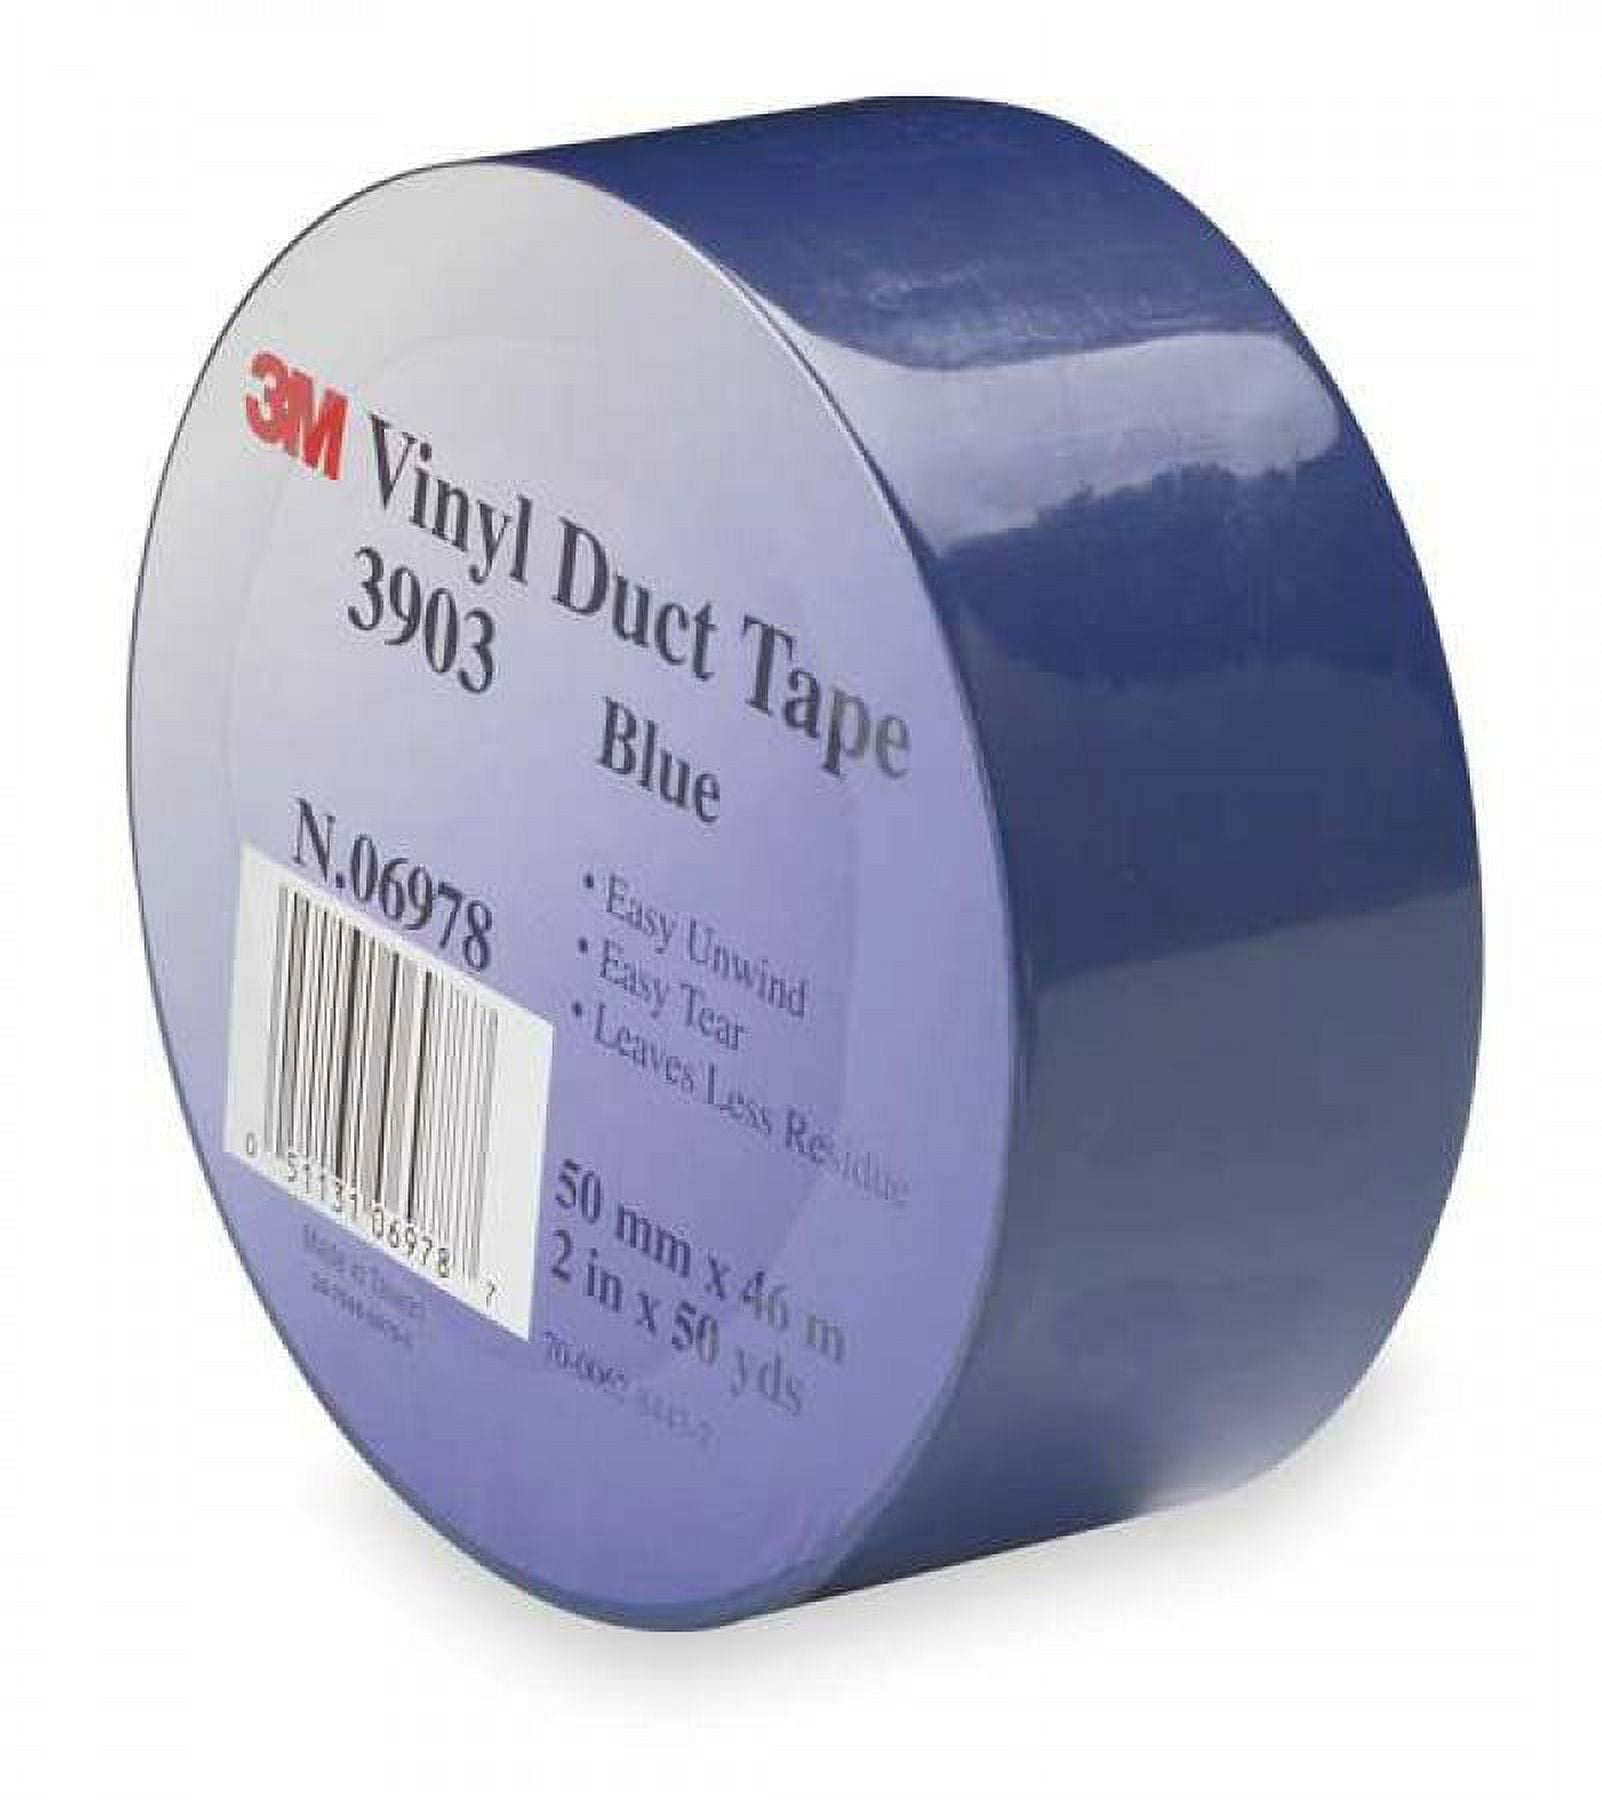 3M Paper Tape (pack of 2) –